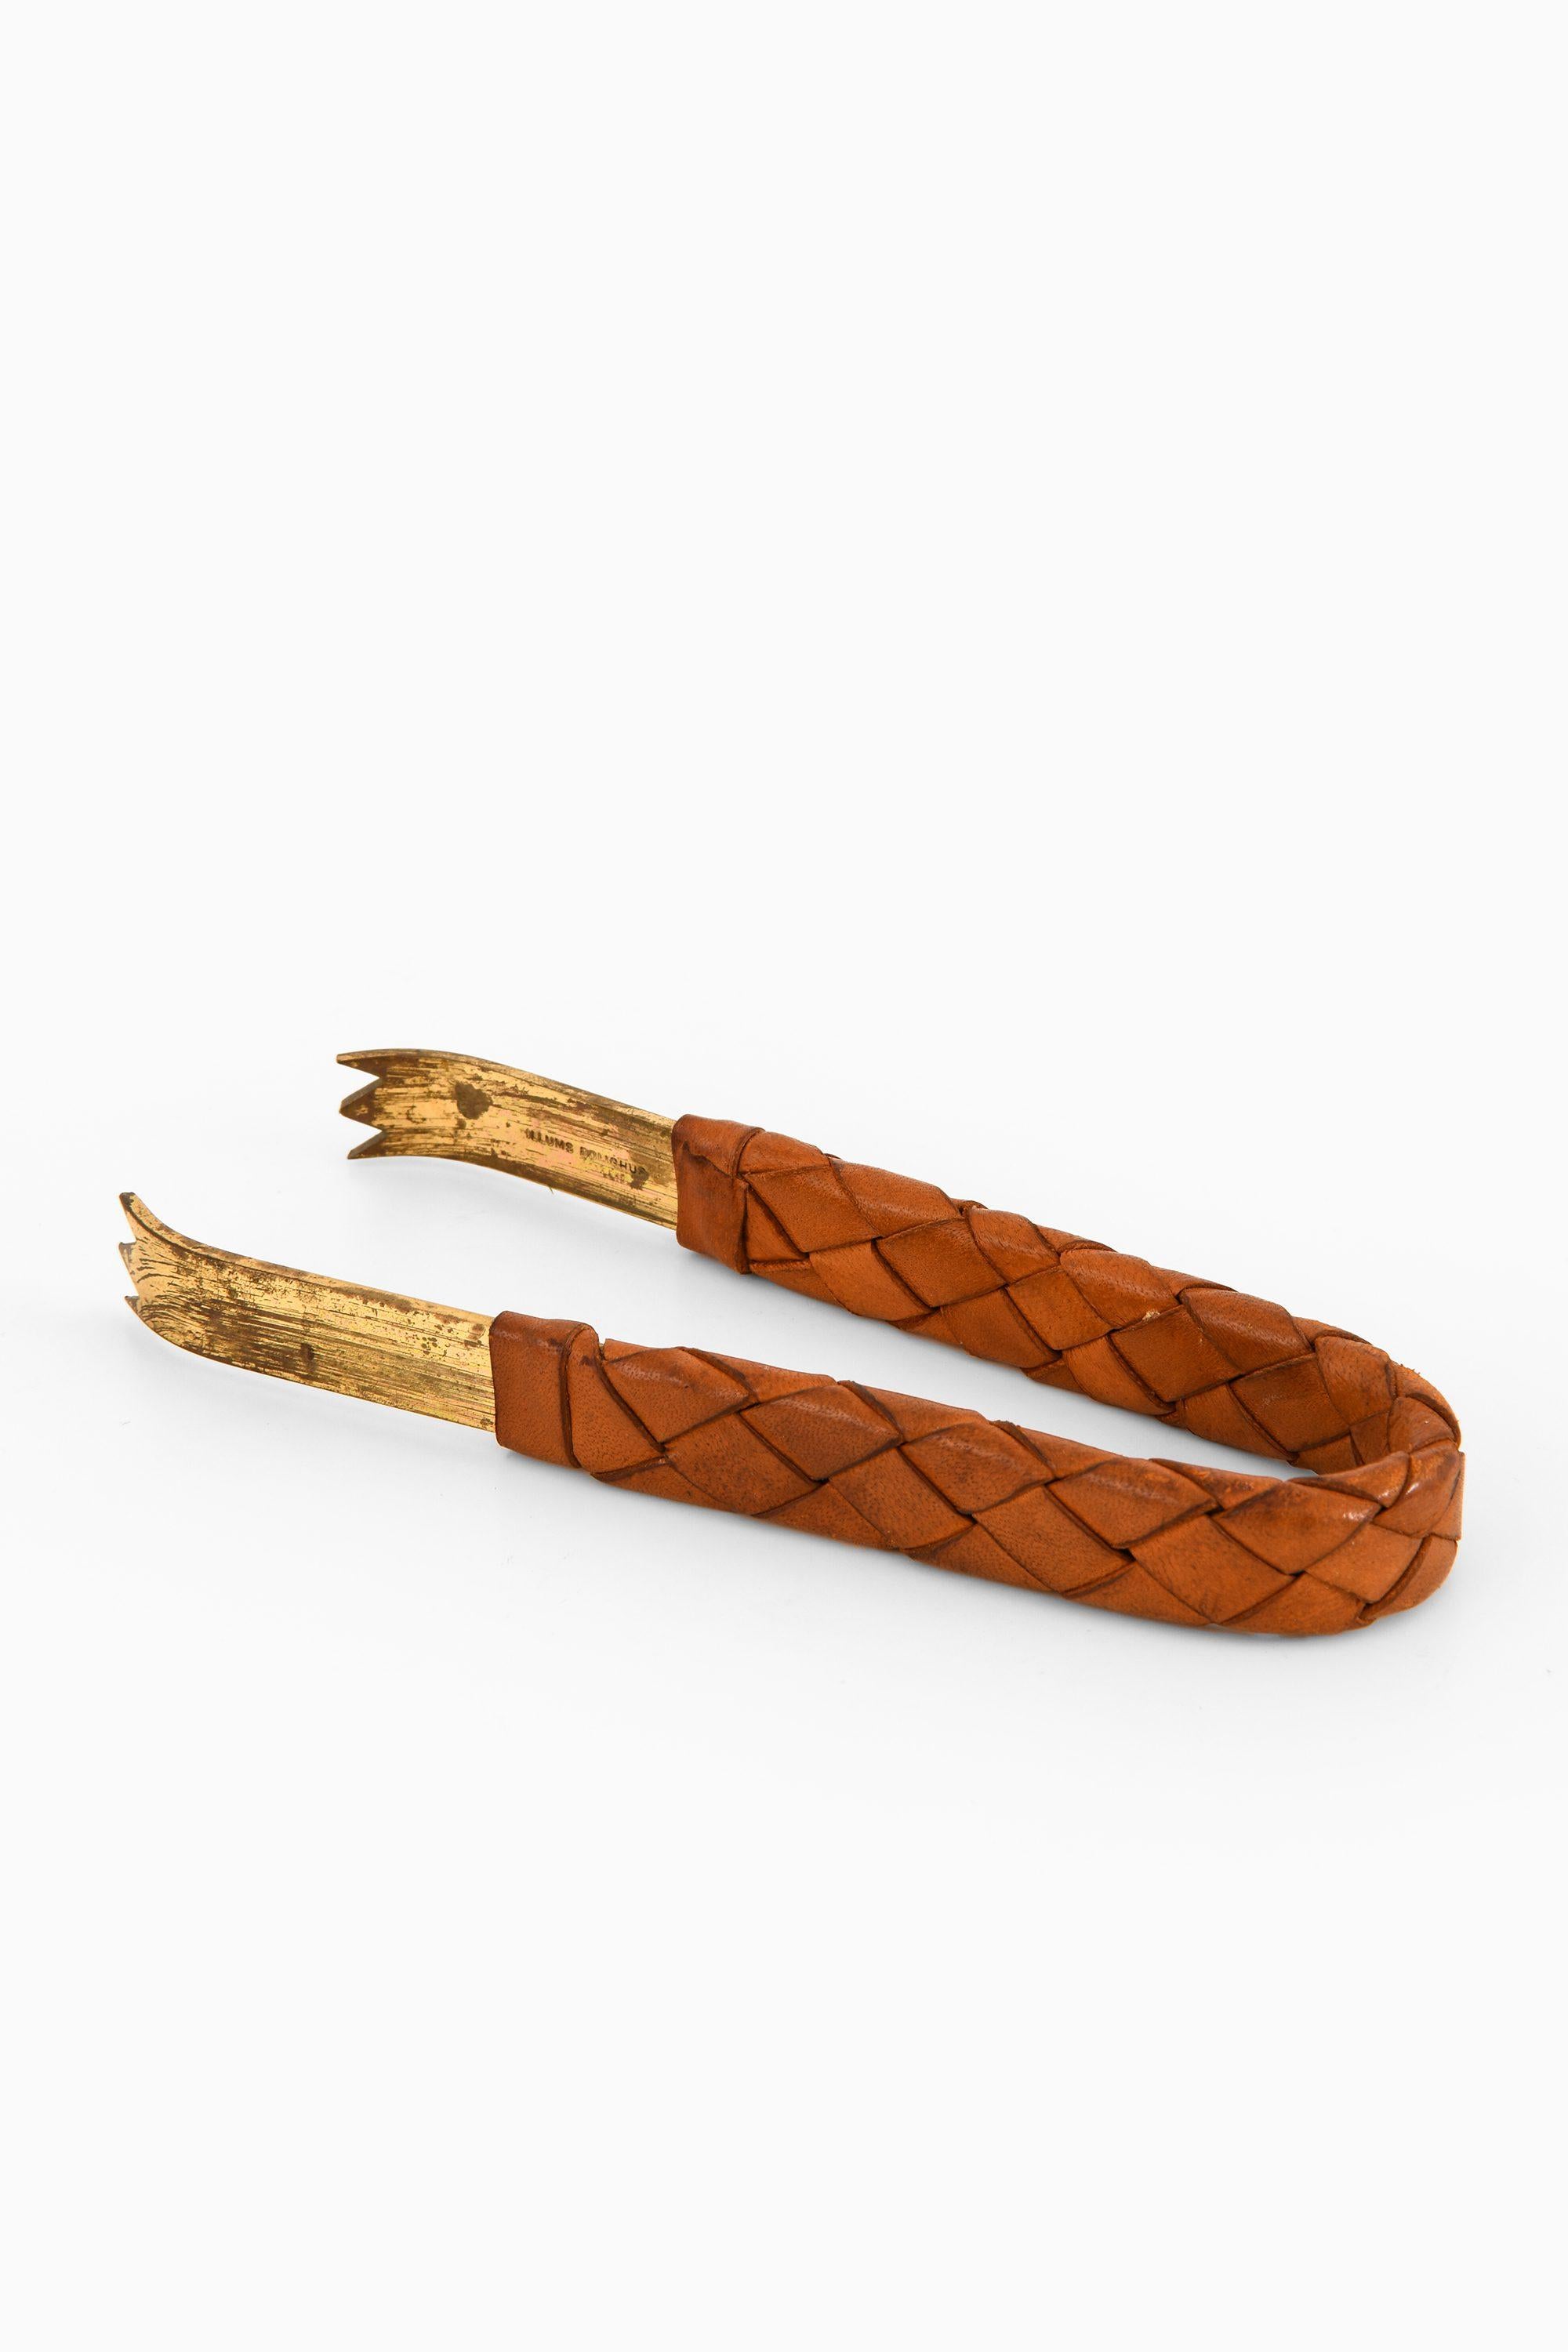 Pincer in Brass and Braided Leather by Carl Auböck, 1950's

Additional Information:
Material: Brass and braided leather
Style: Mid century, Europe
Produced by Carl Auböck workshop in Austria
Retailed at Illums Bolighus in Denmark
Dimensions (W x D x